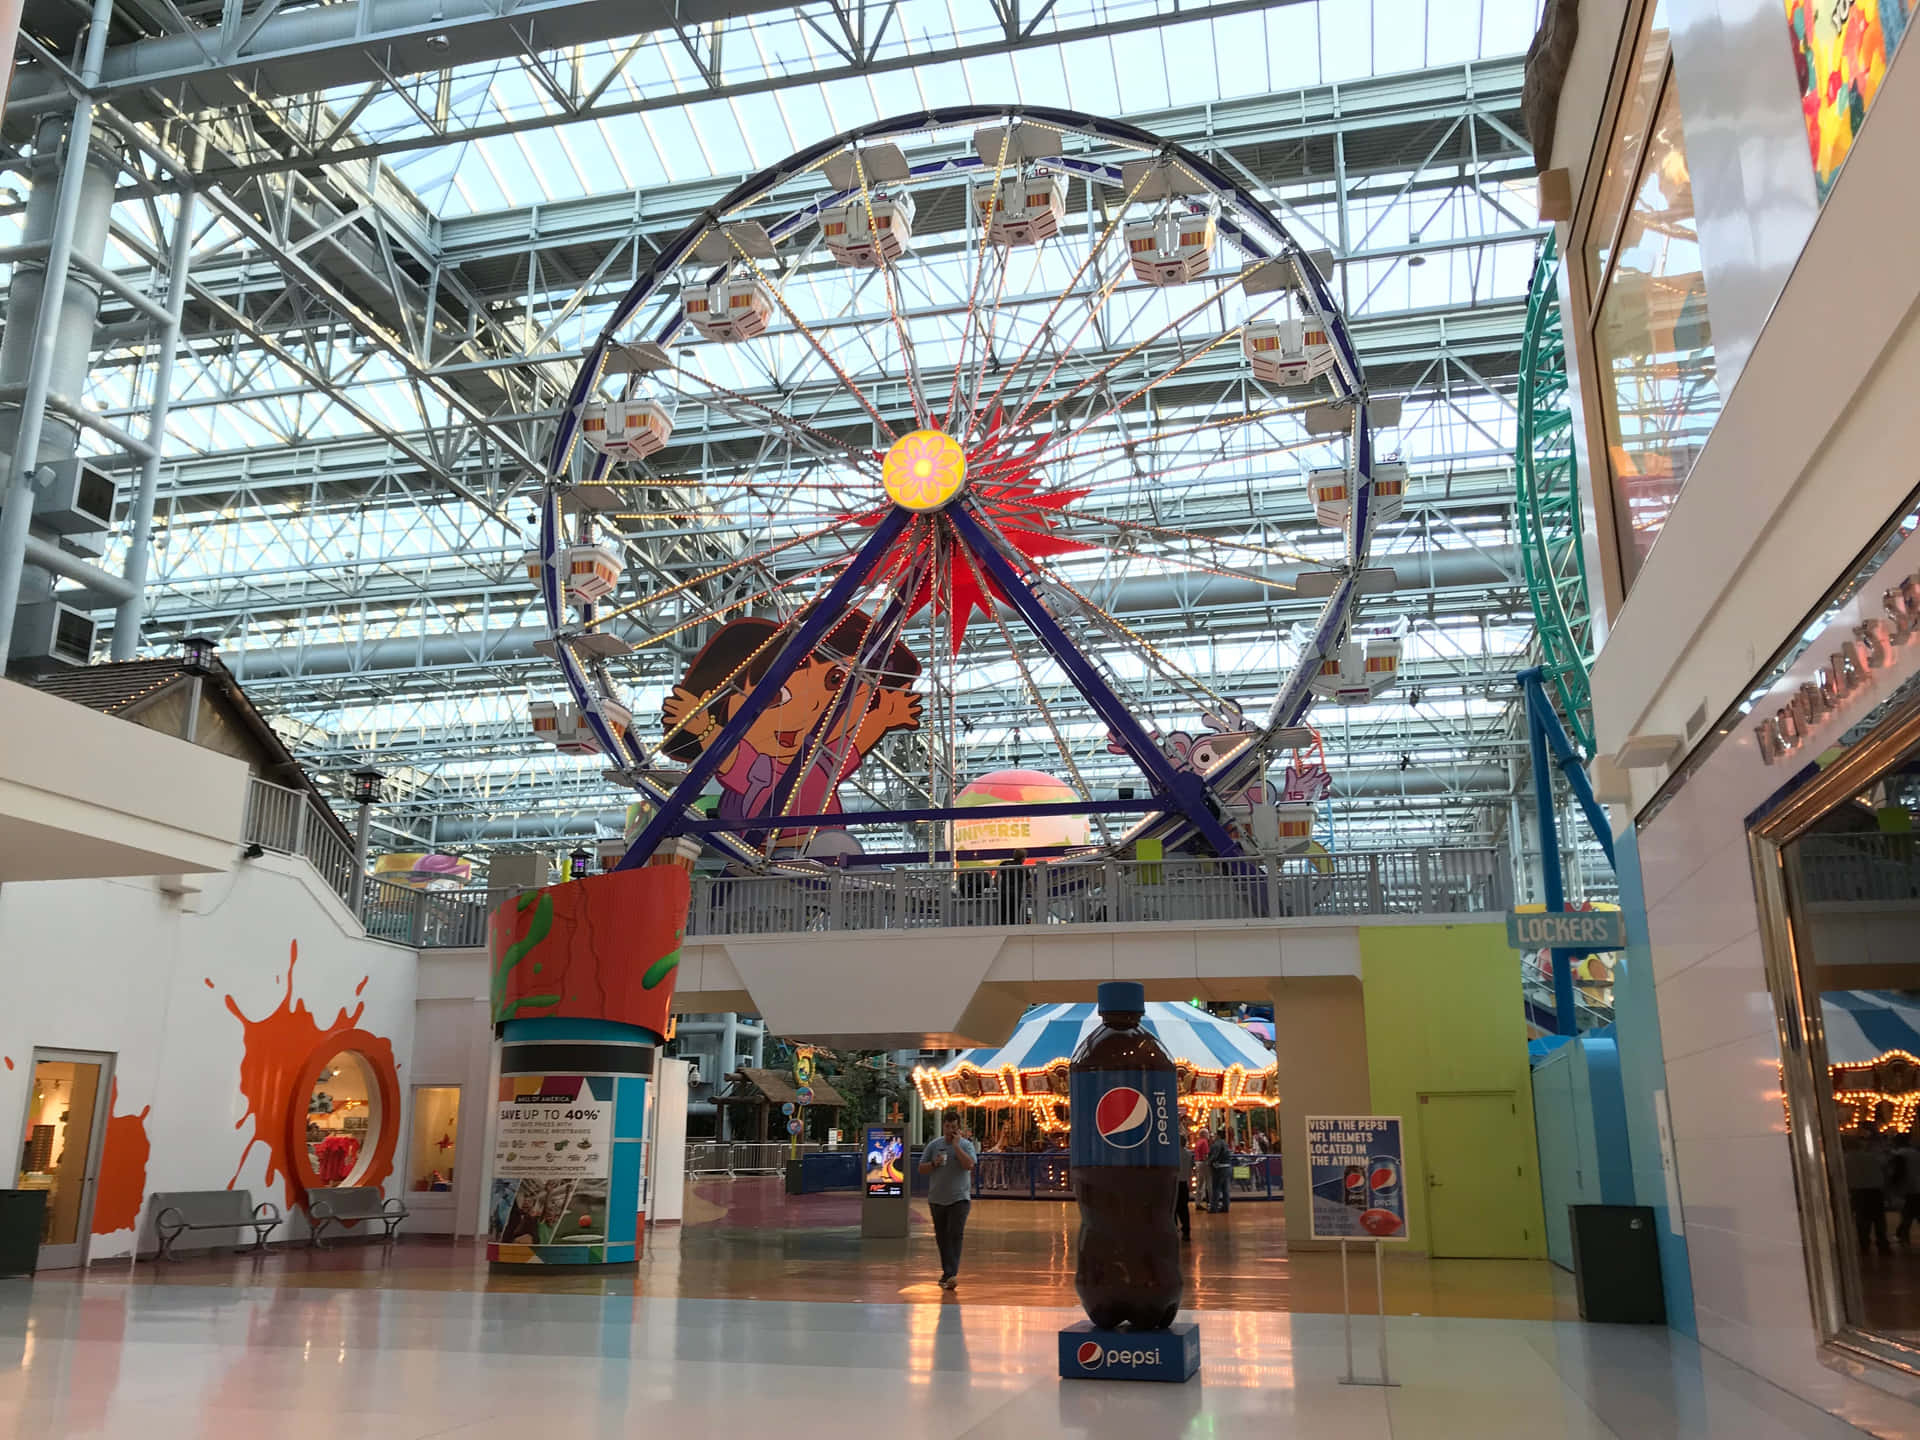 Fun and shops at Mall of America!